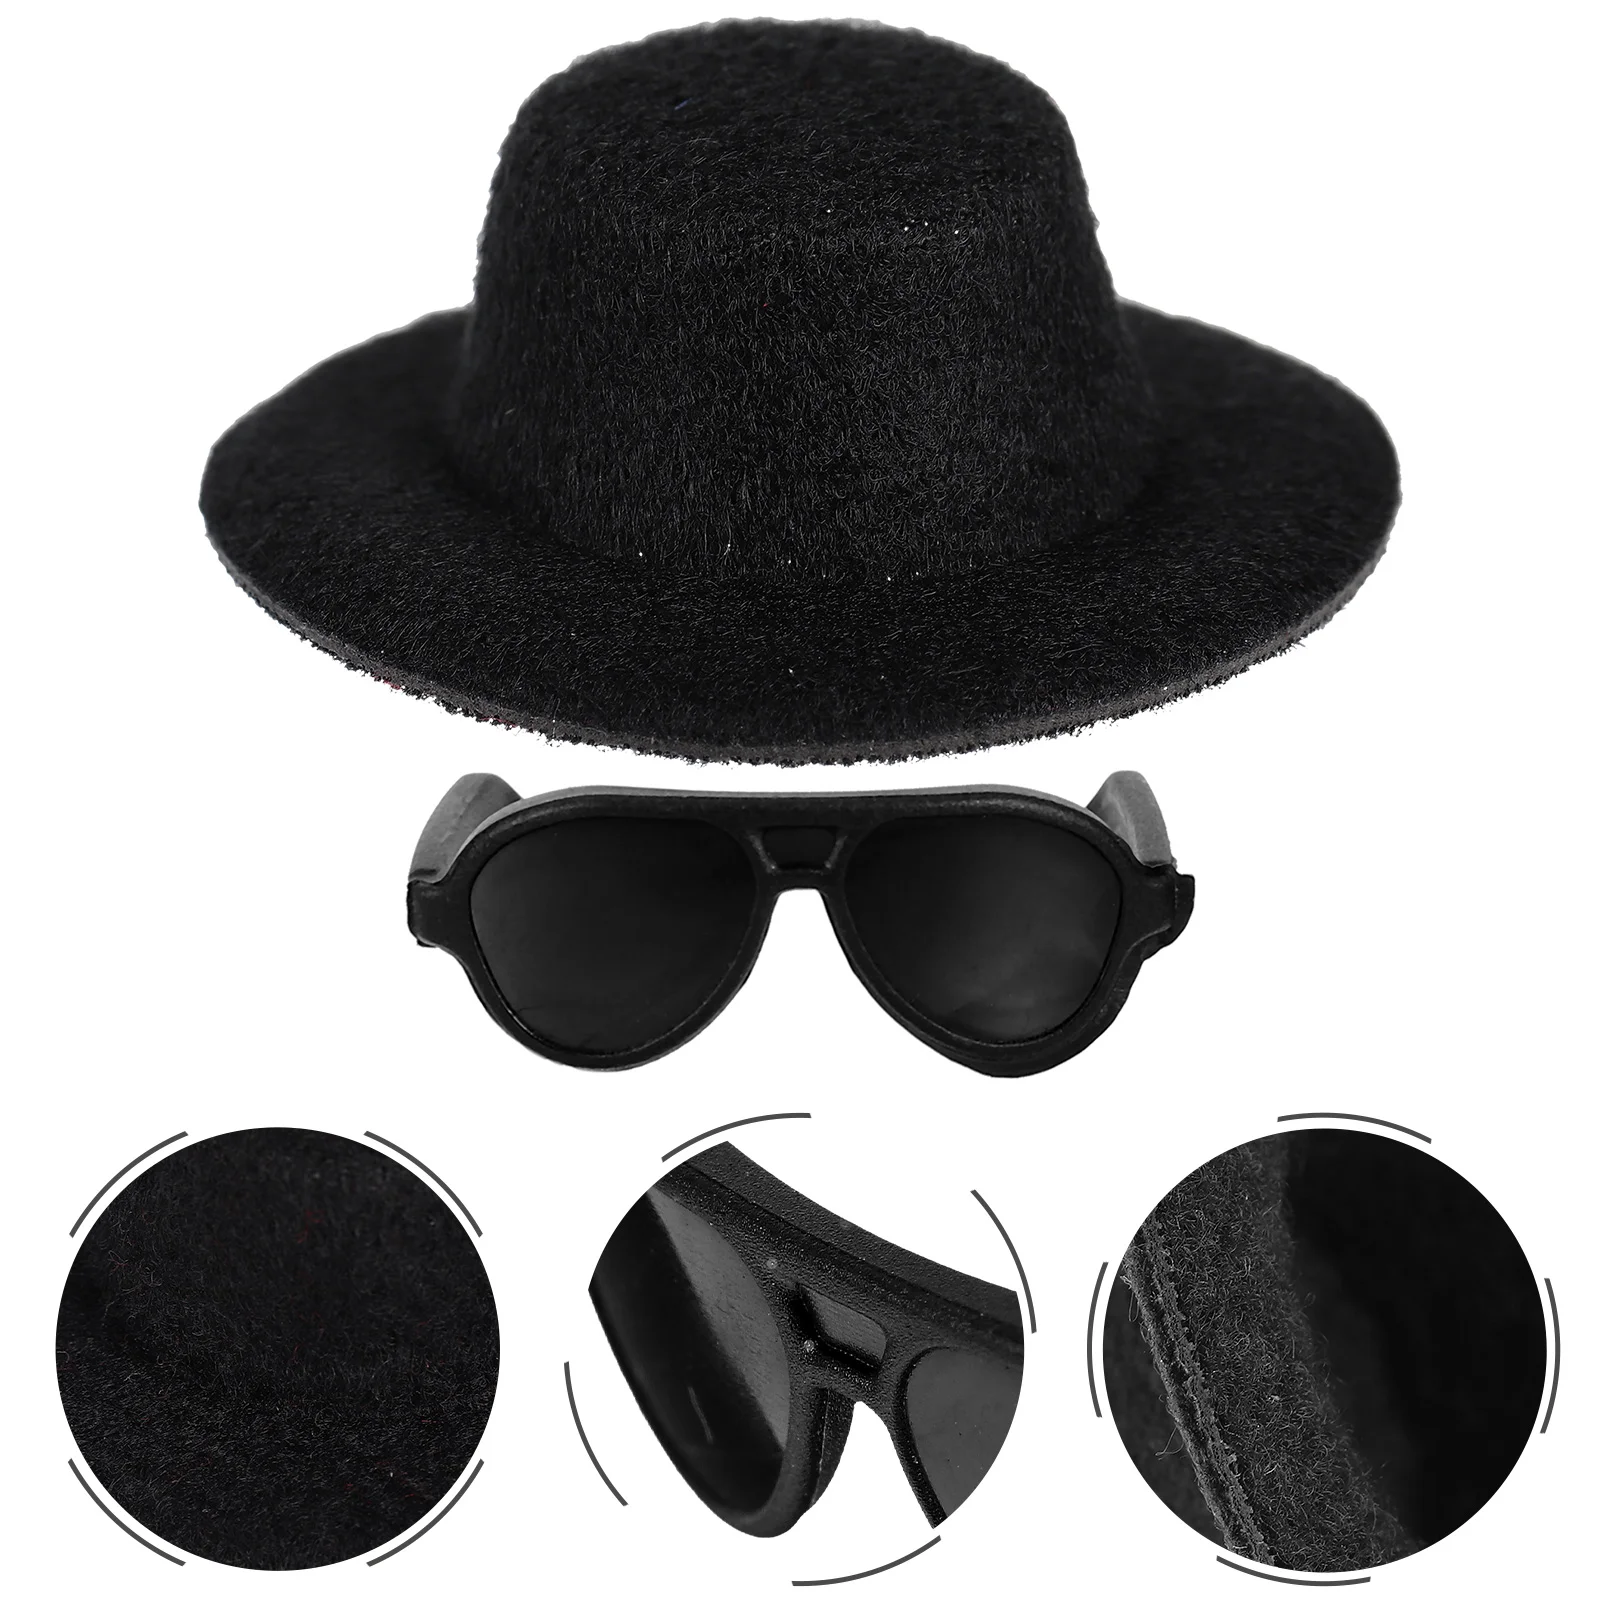 

Hat Hats Mini Miniature Formal Sunglasses Crafts Black Cowboy Snowman Tiny Toy Simulated Fake Fabric Making Party Decor Craft